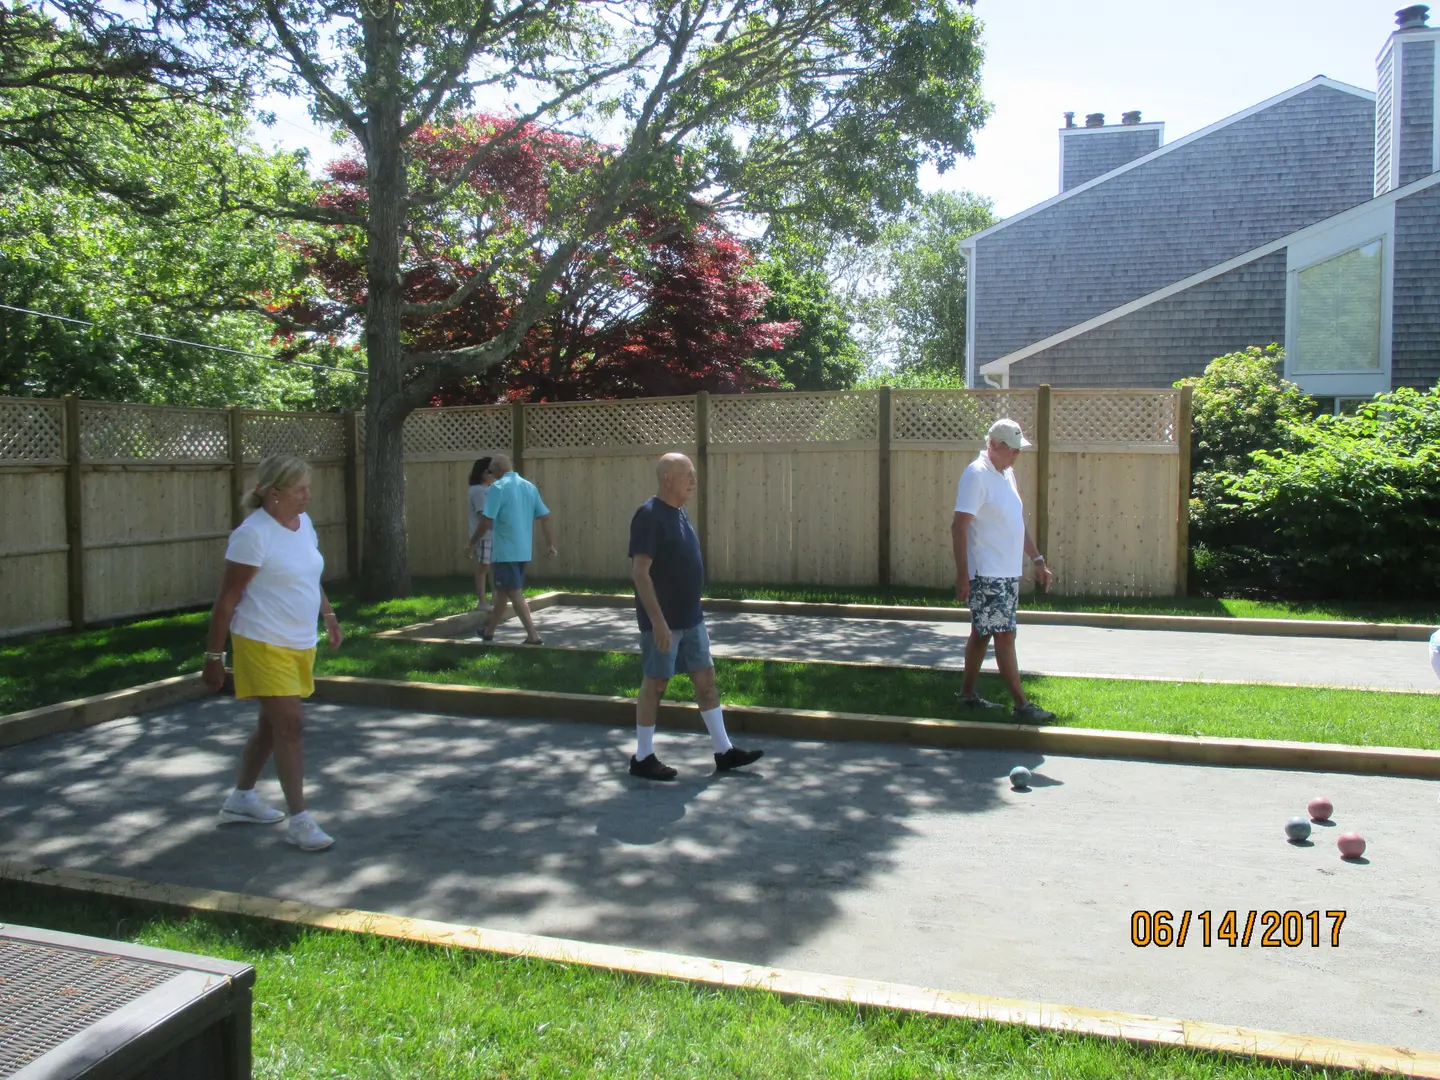 A group of people playing tennis on the court